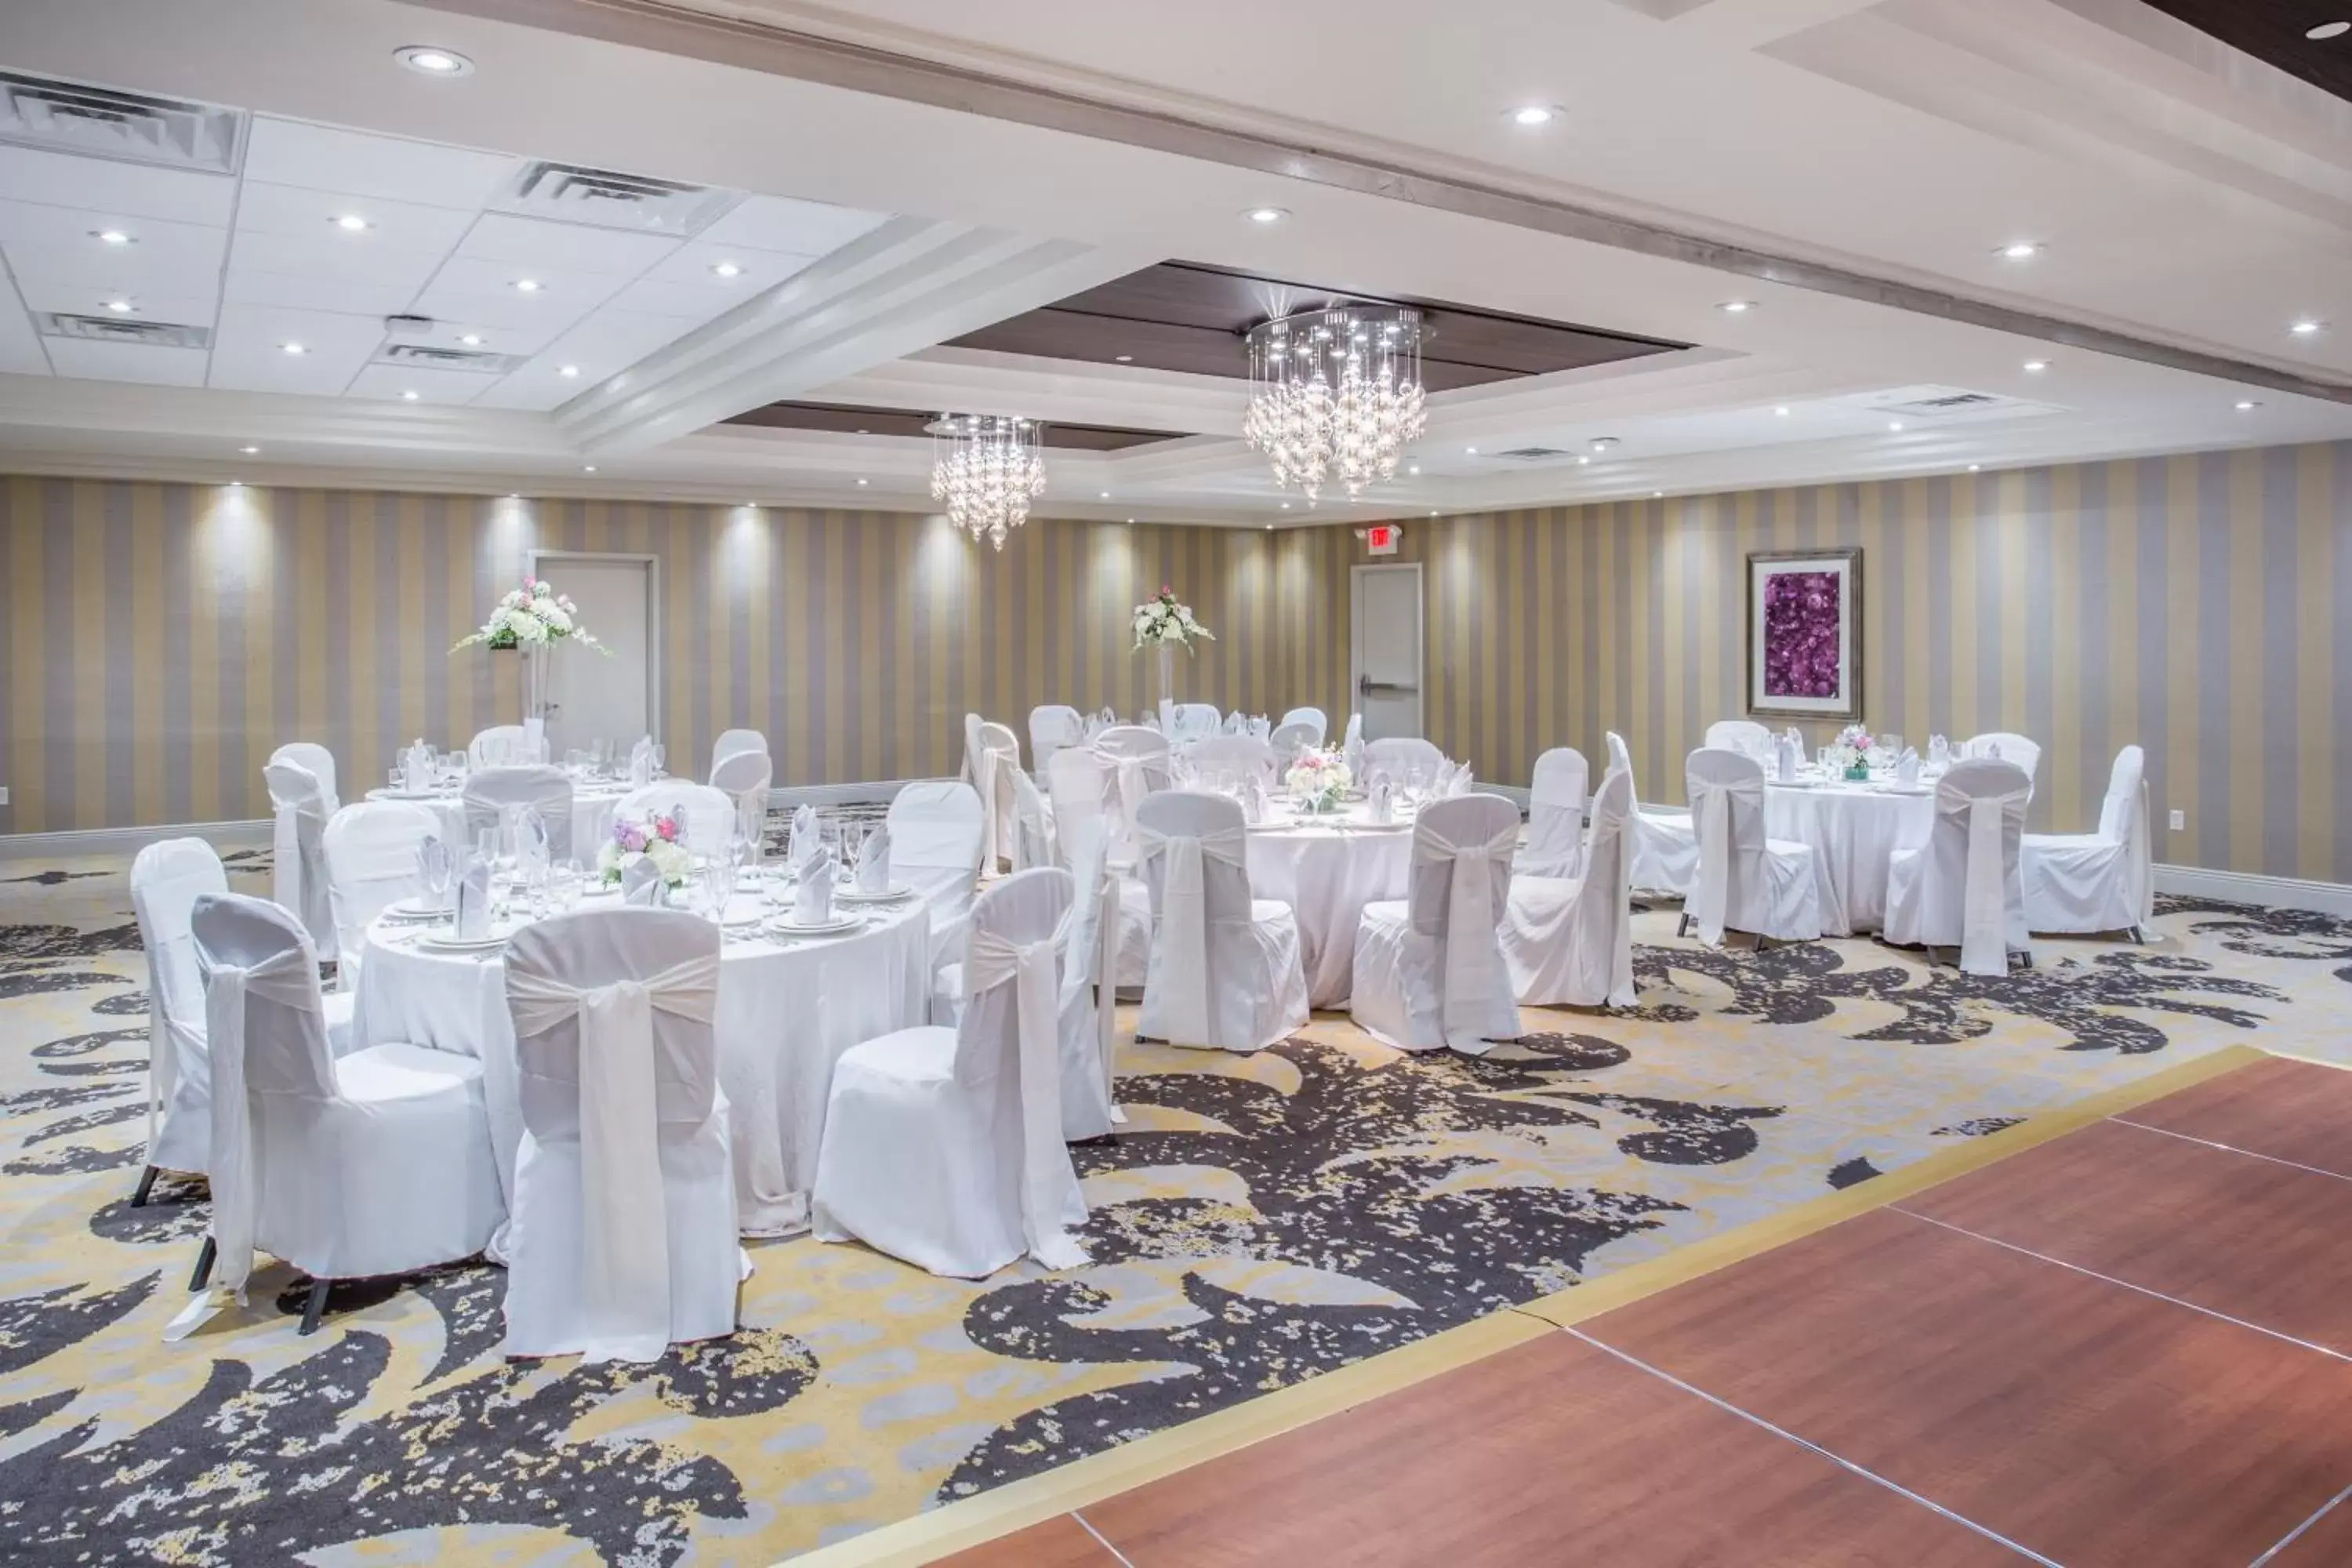 Banquet/Function facilities, Banquet Facilities in Crowne Plaza Saddle Brook, an IHG Hotel